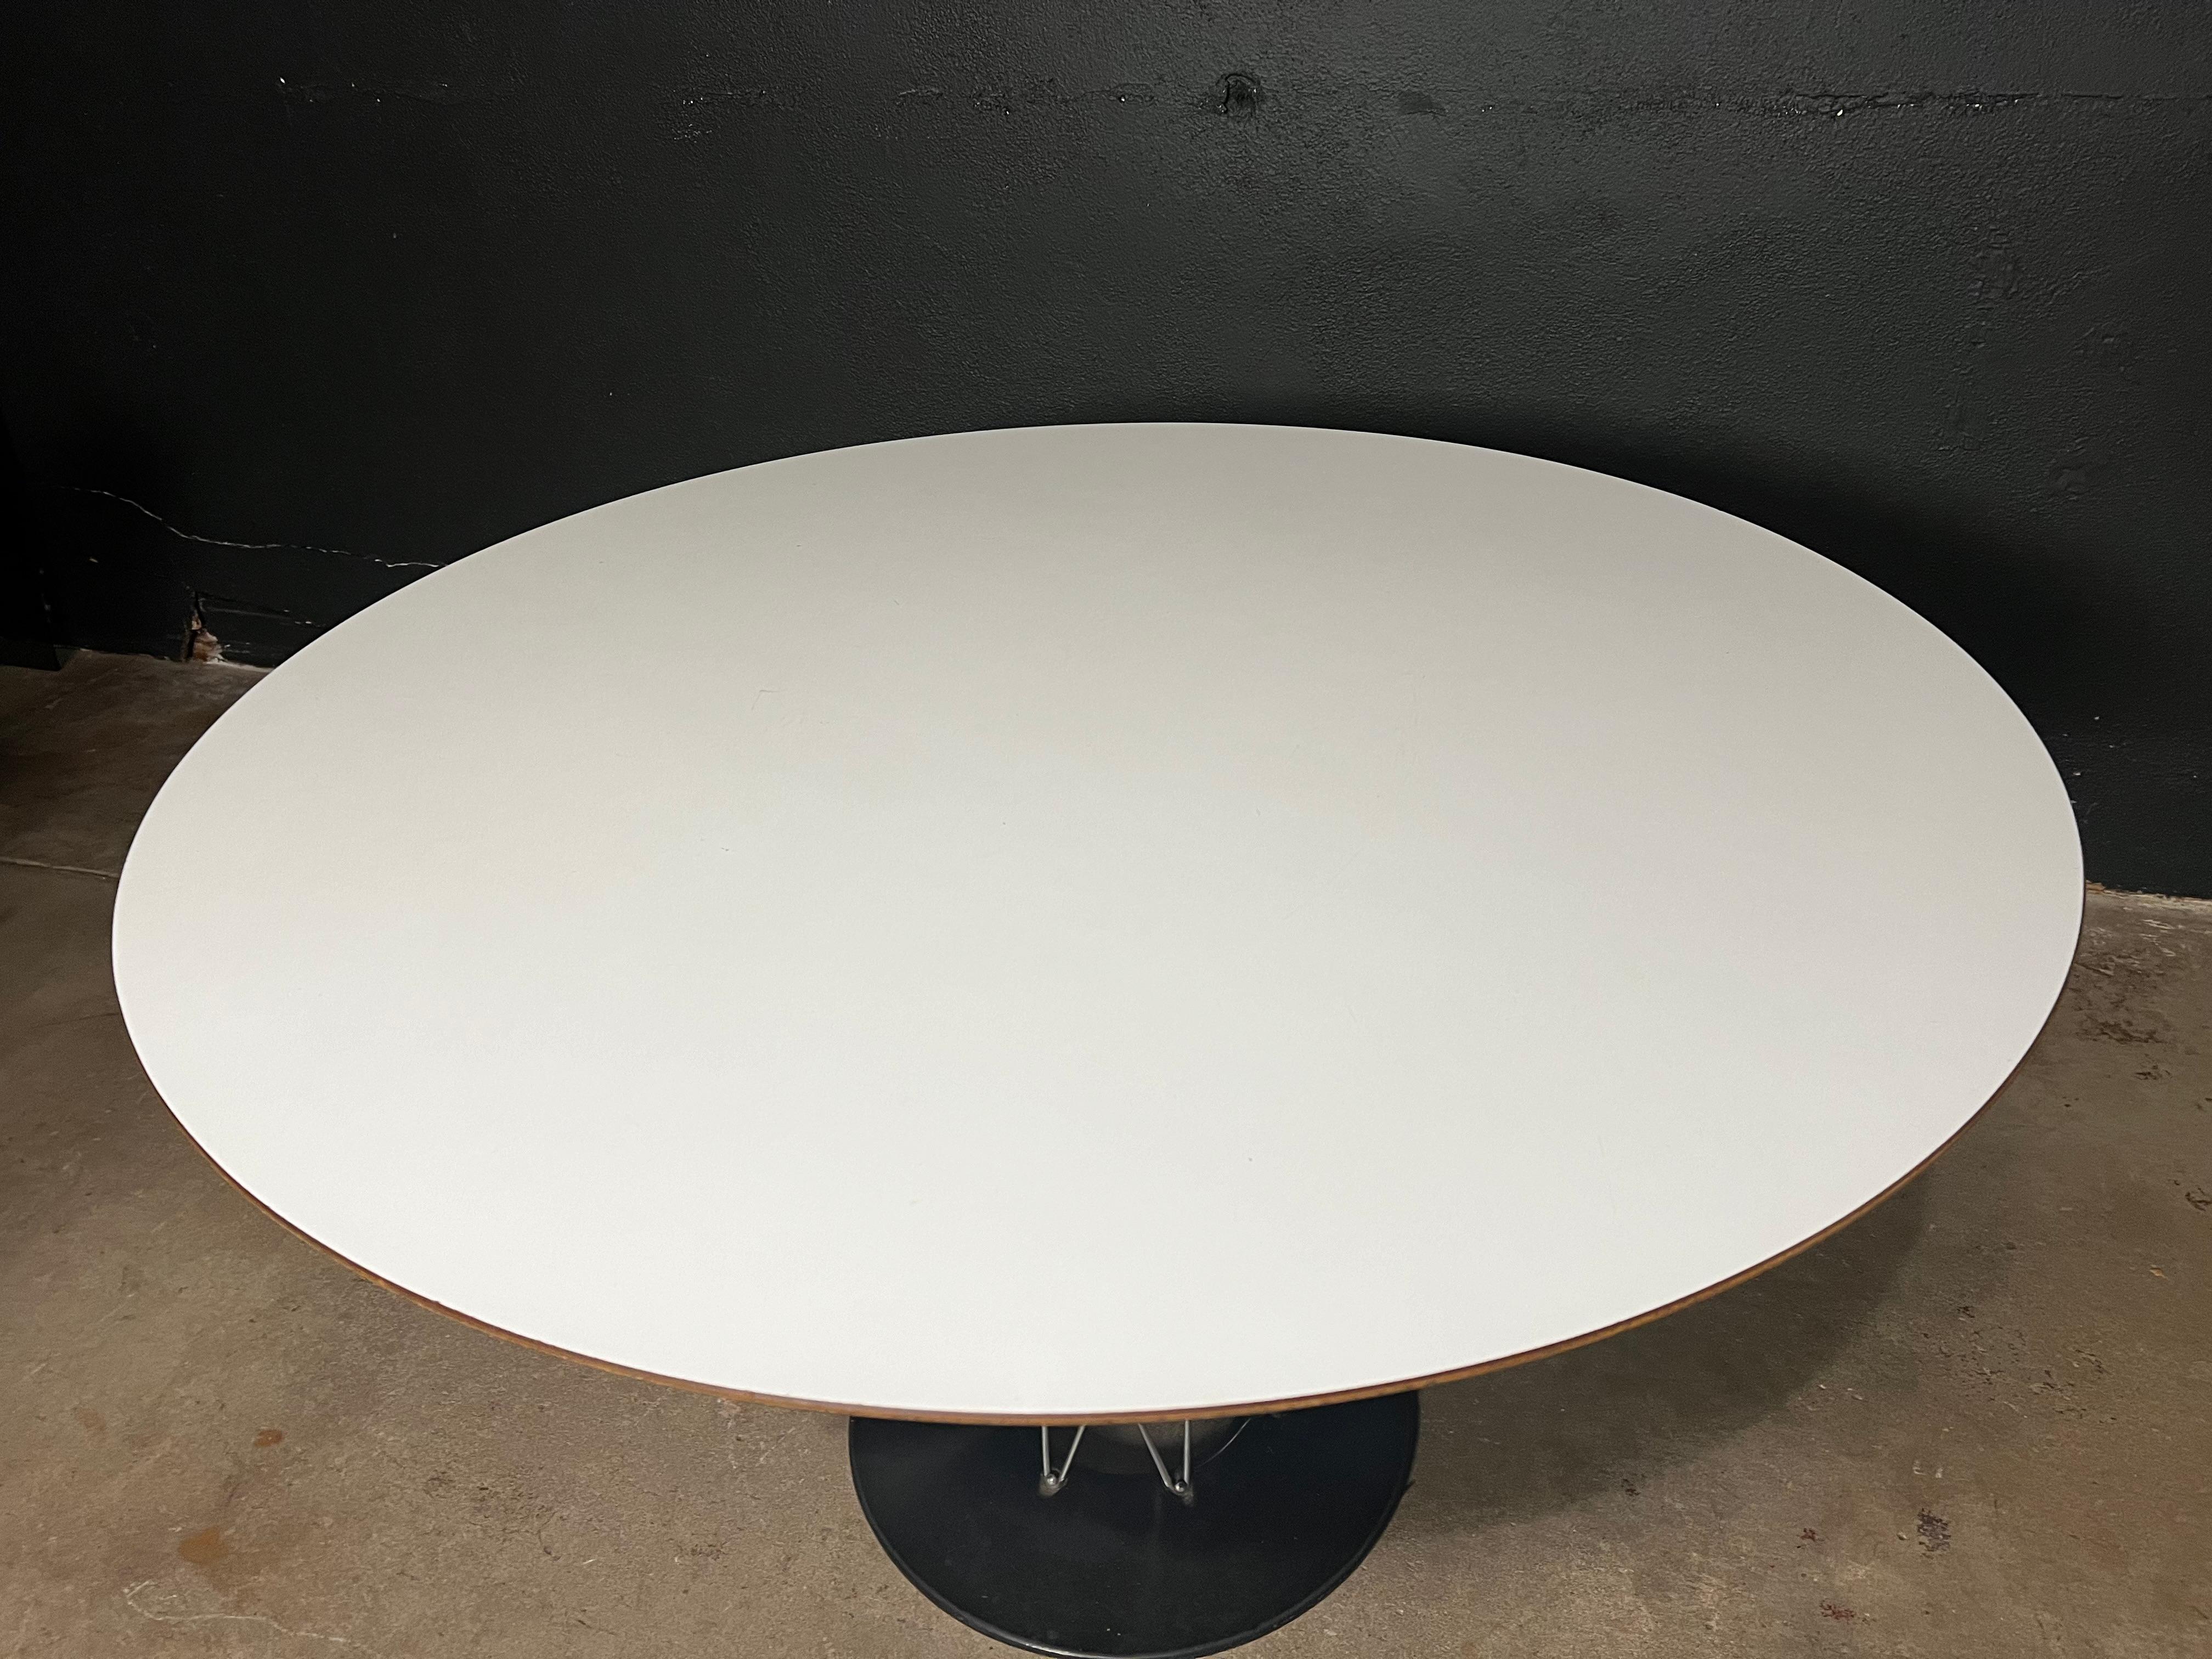 The 47.5-inch Isamu Noguchi Cyclone dining table by Knoll is a rare and iconic piece, showcasing a harmonious blend of artistry and functionality. Designed by the renowned Isamu Noguchi, its distinctive base features a dynamic interplay of